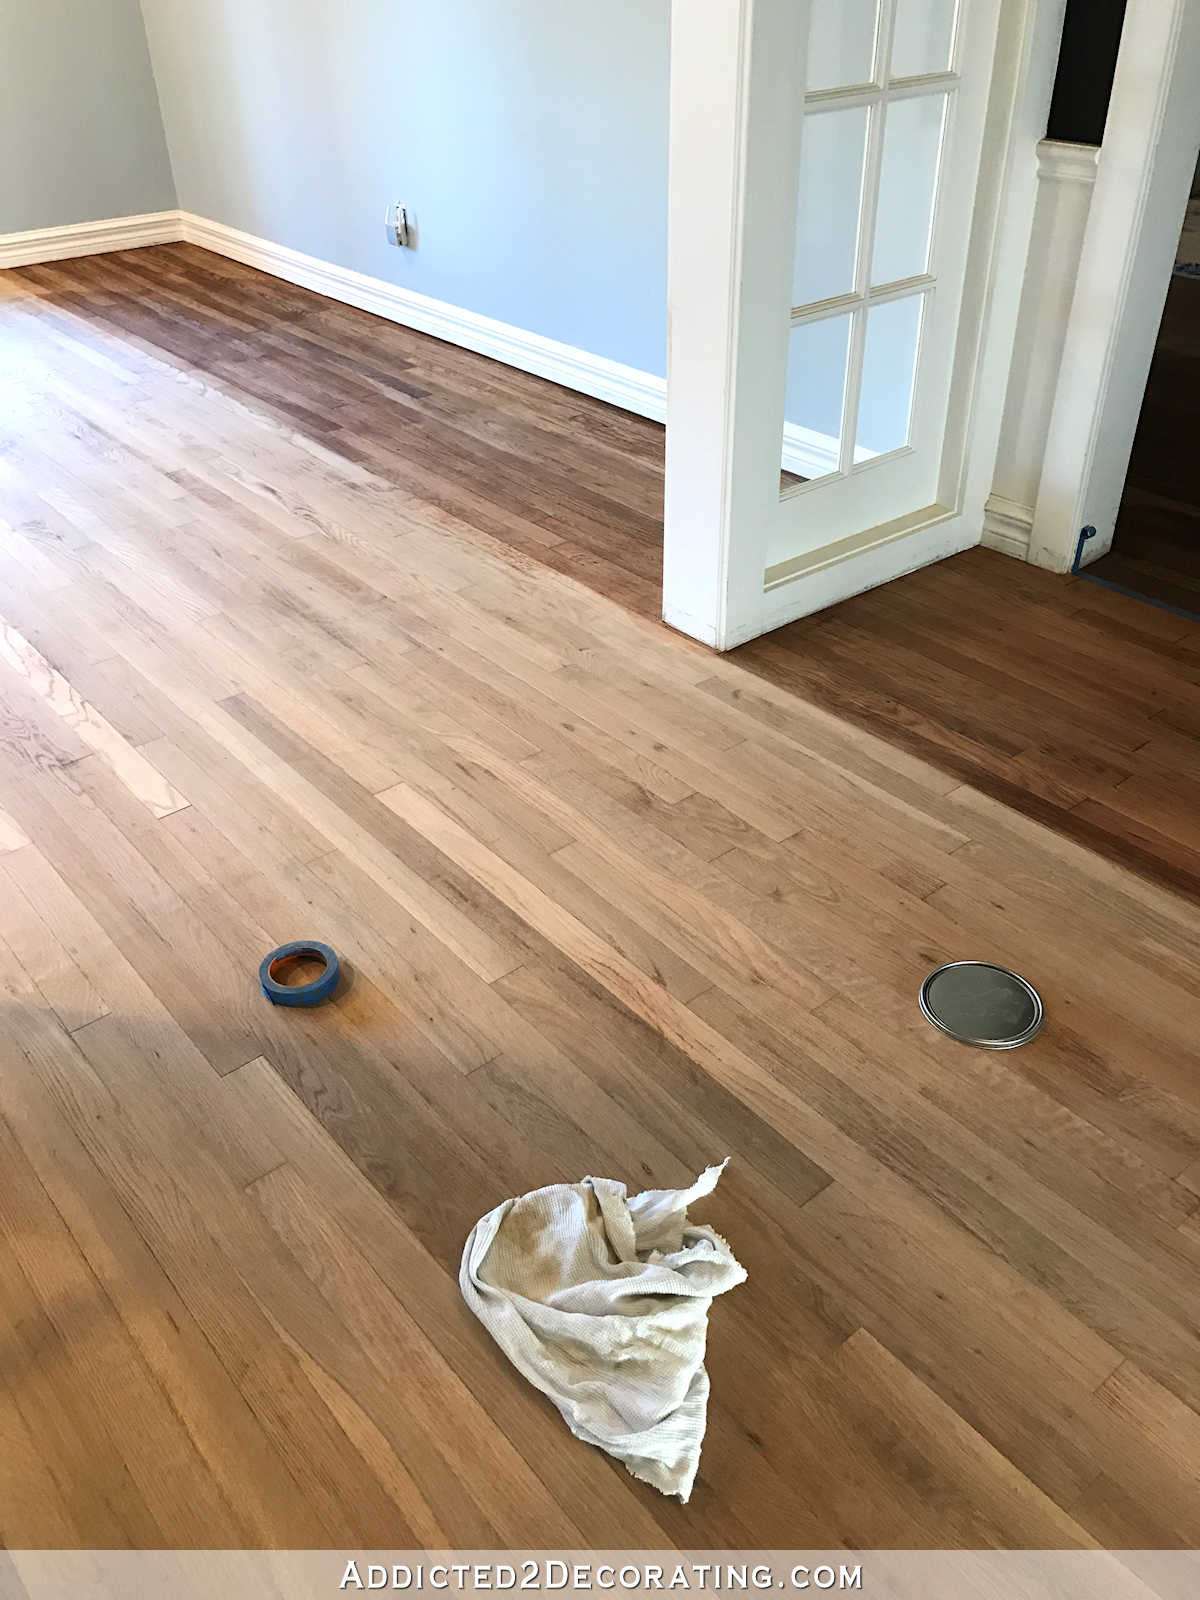 refinish hardwood floors diy or professional of adventures in staining my red oak hardwood floors products process intended for staining red oak hardwood floors 3 entryway and music room